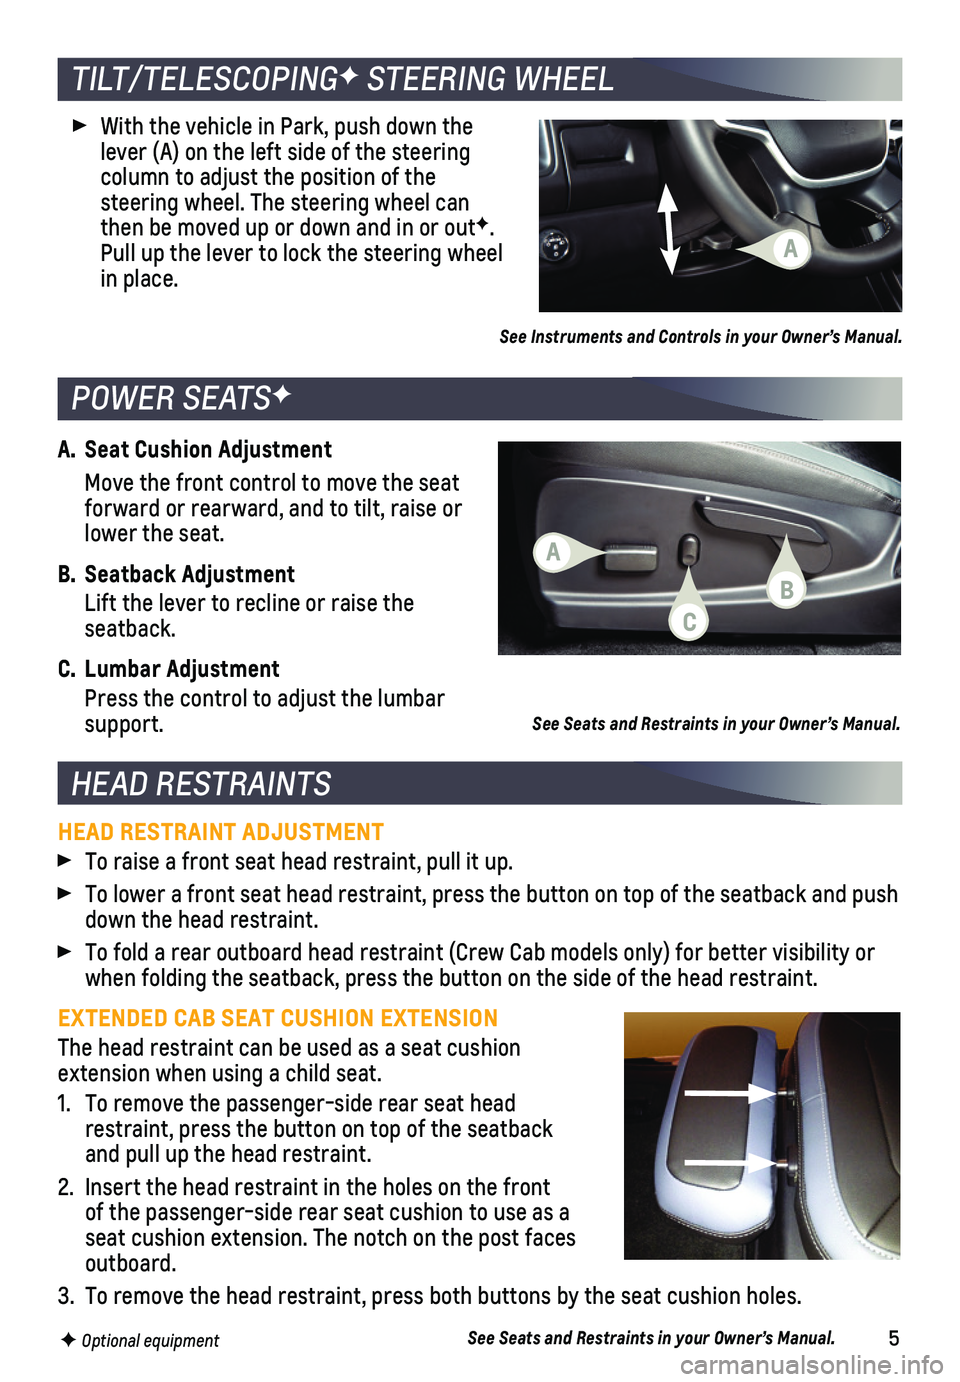 CHEVROLET COLORADO 2019  Get To Know Guide 5
A. Seat Cushion Adjustment
 Move the front control to move the seat forward or rearward, and to tilt, raise or lower the seat.
B. Seatback Adjustment
 Lift the lever to recline or raise the  seatbac